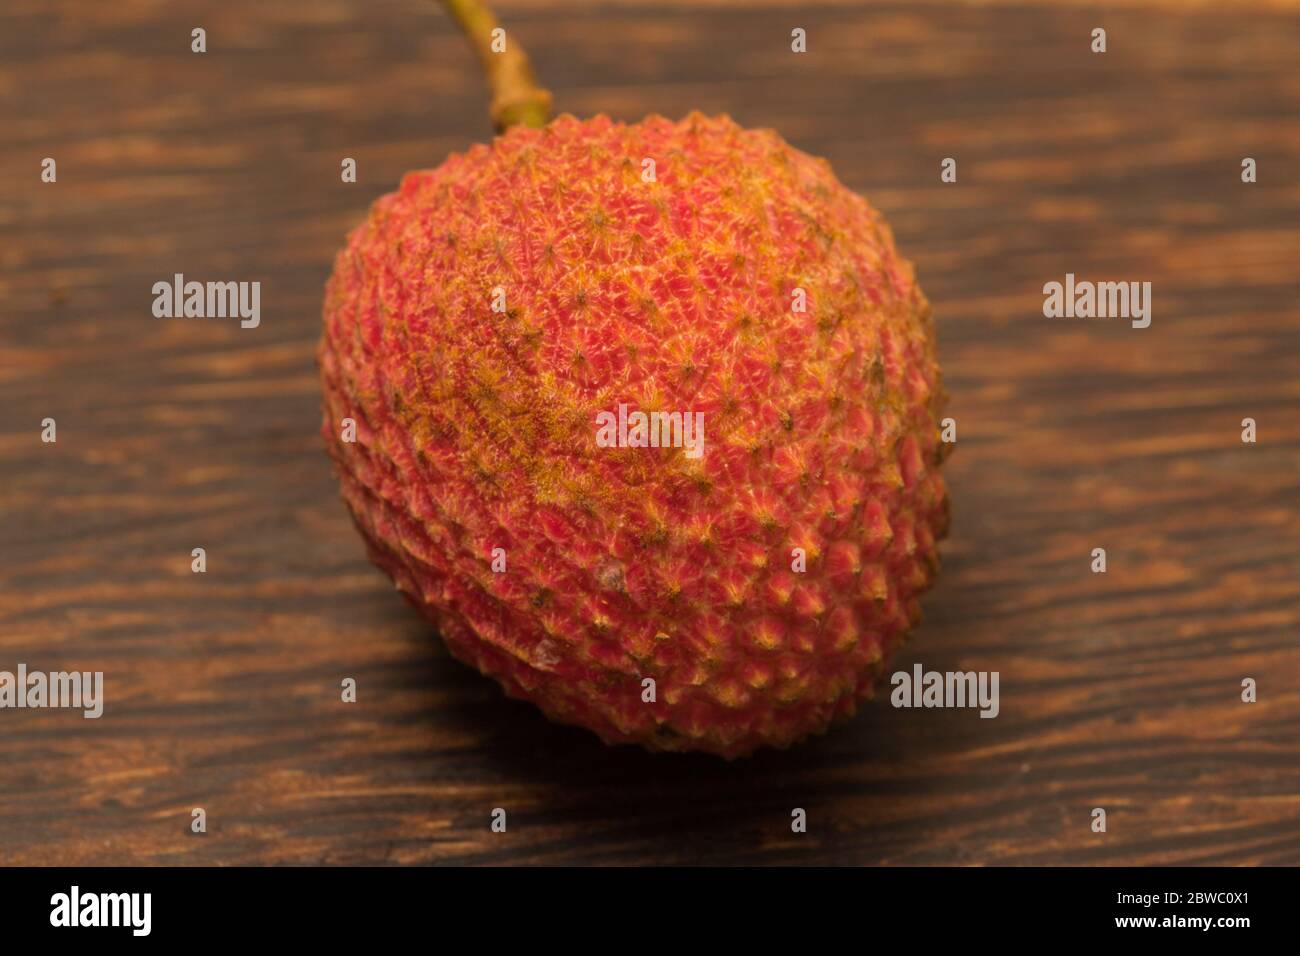 Close-up view of ripe lychee on black wooden background. Stock Photo